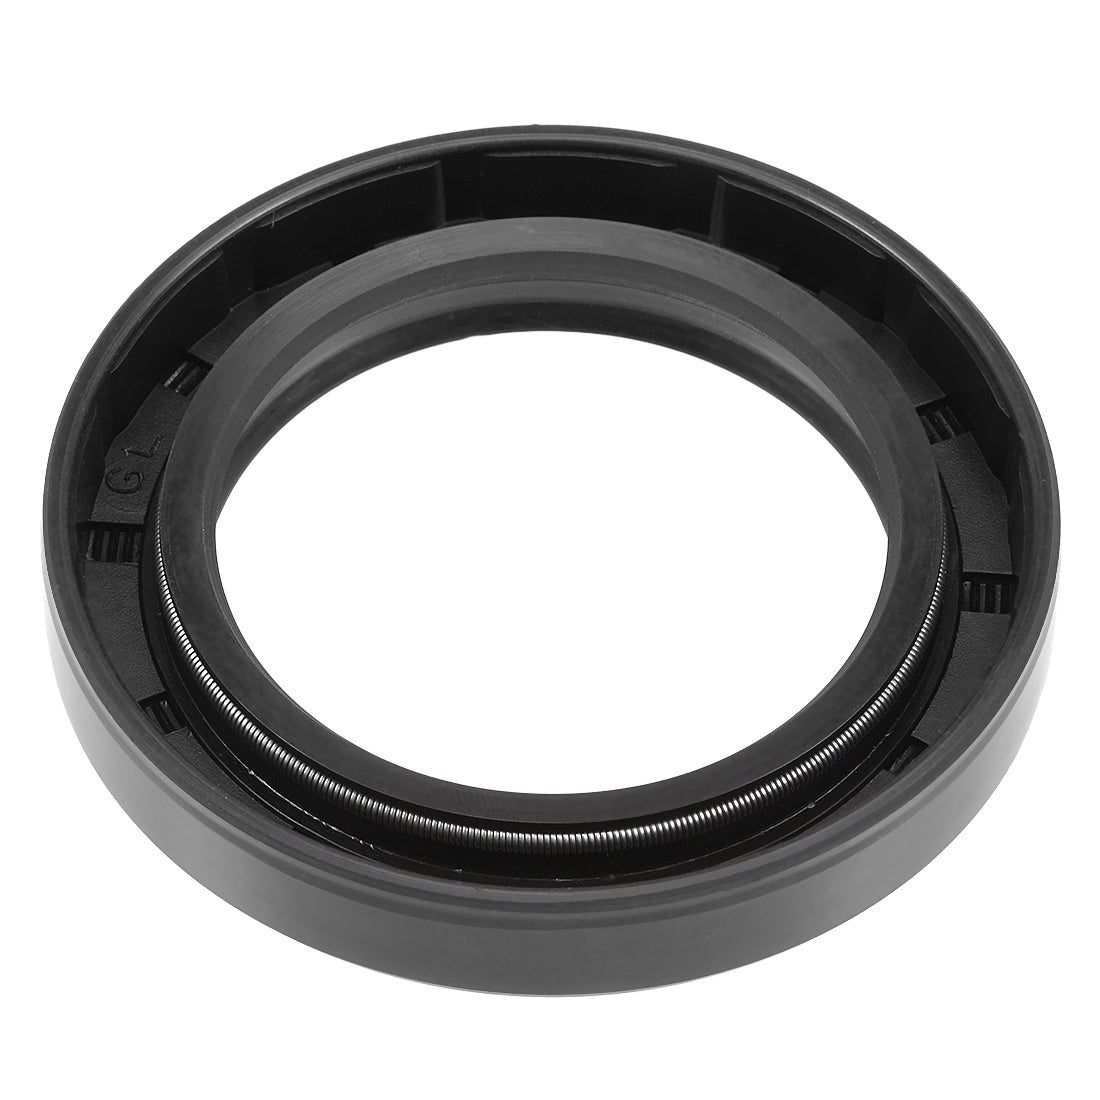 uxcell Uxcell Oil Seal, TC 45mm x 65mm x 10mm, Nitrile Rubber Cover Double Lip